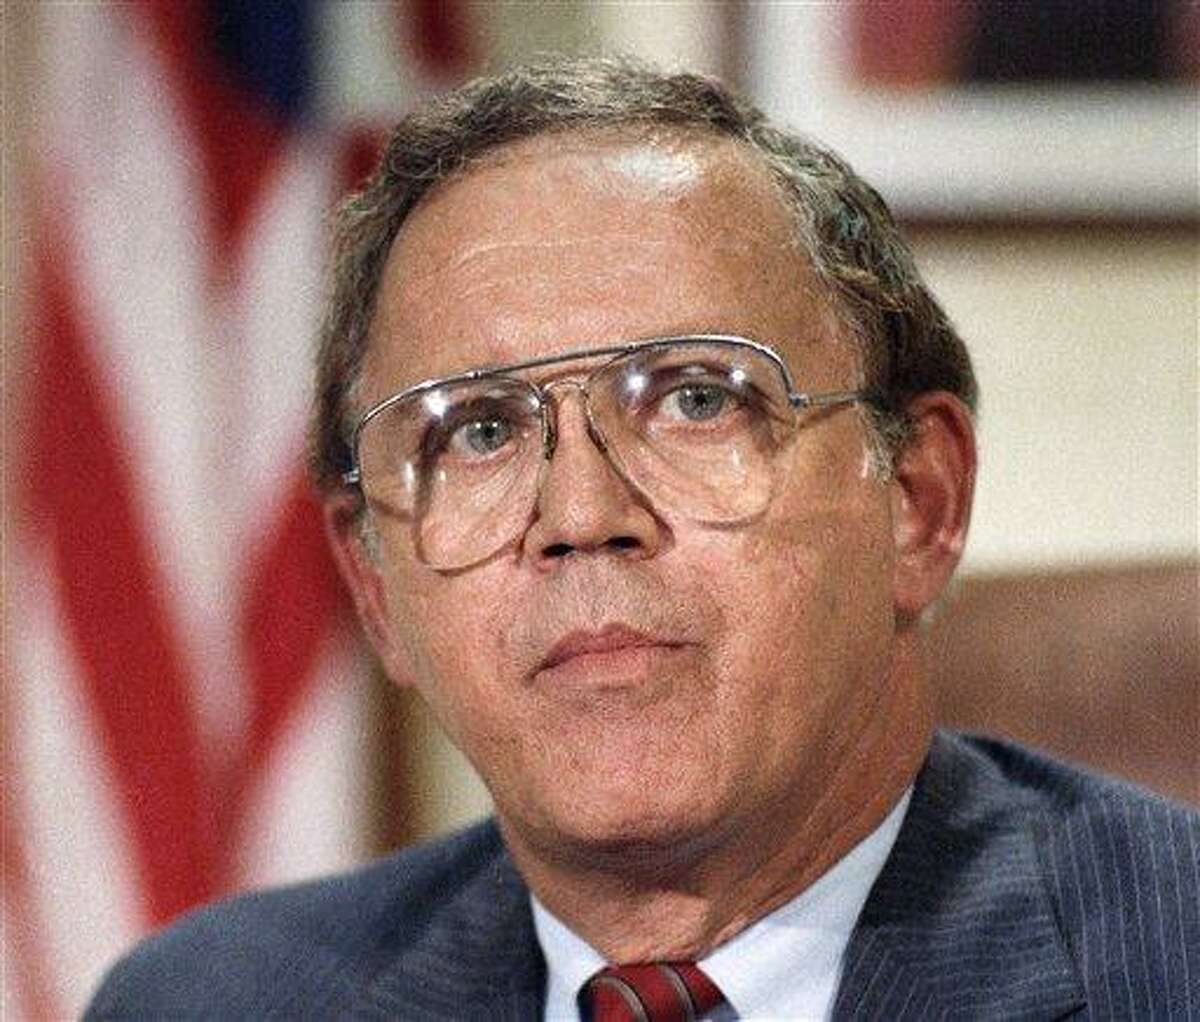 FILE - This Dec. 16, 1986 file photo shows Sen. Warren Rudman, R-N.H. on Capitol Hill in Washington. Rudman, who co-authored a ground-breaking budget balancing law, championed ethics and led a commission that predicted the danger of homeland terrorist attacks before 9/11, has died. He was 82. (AP Photo/Ron Edmonds, File)